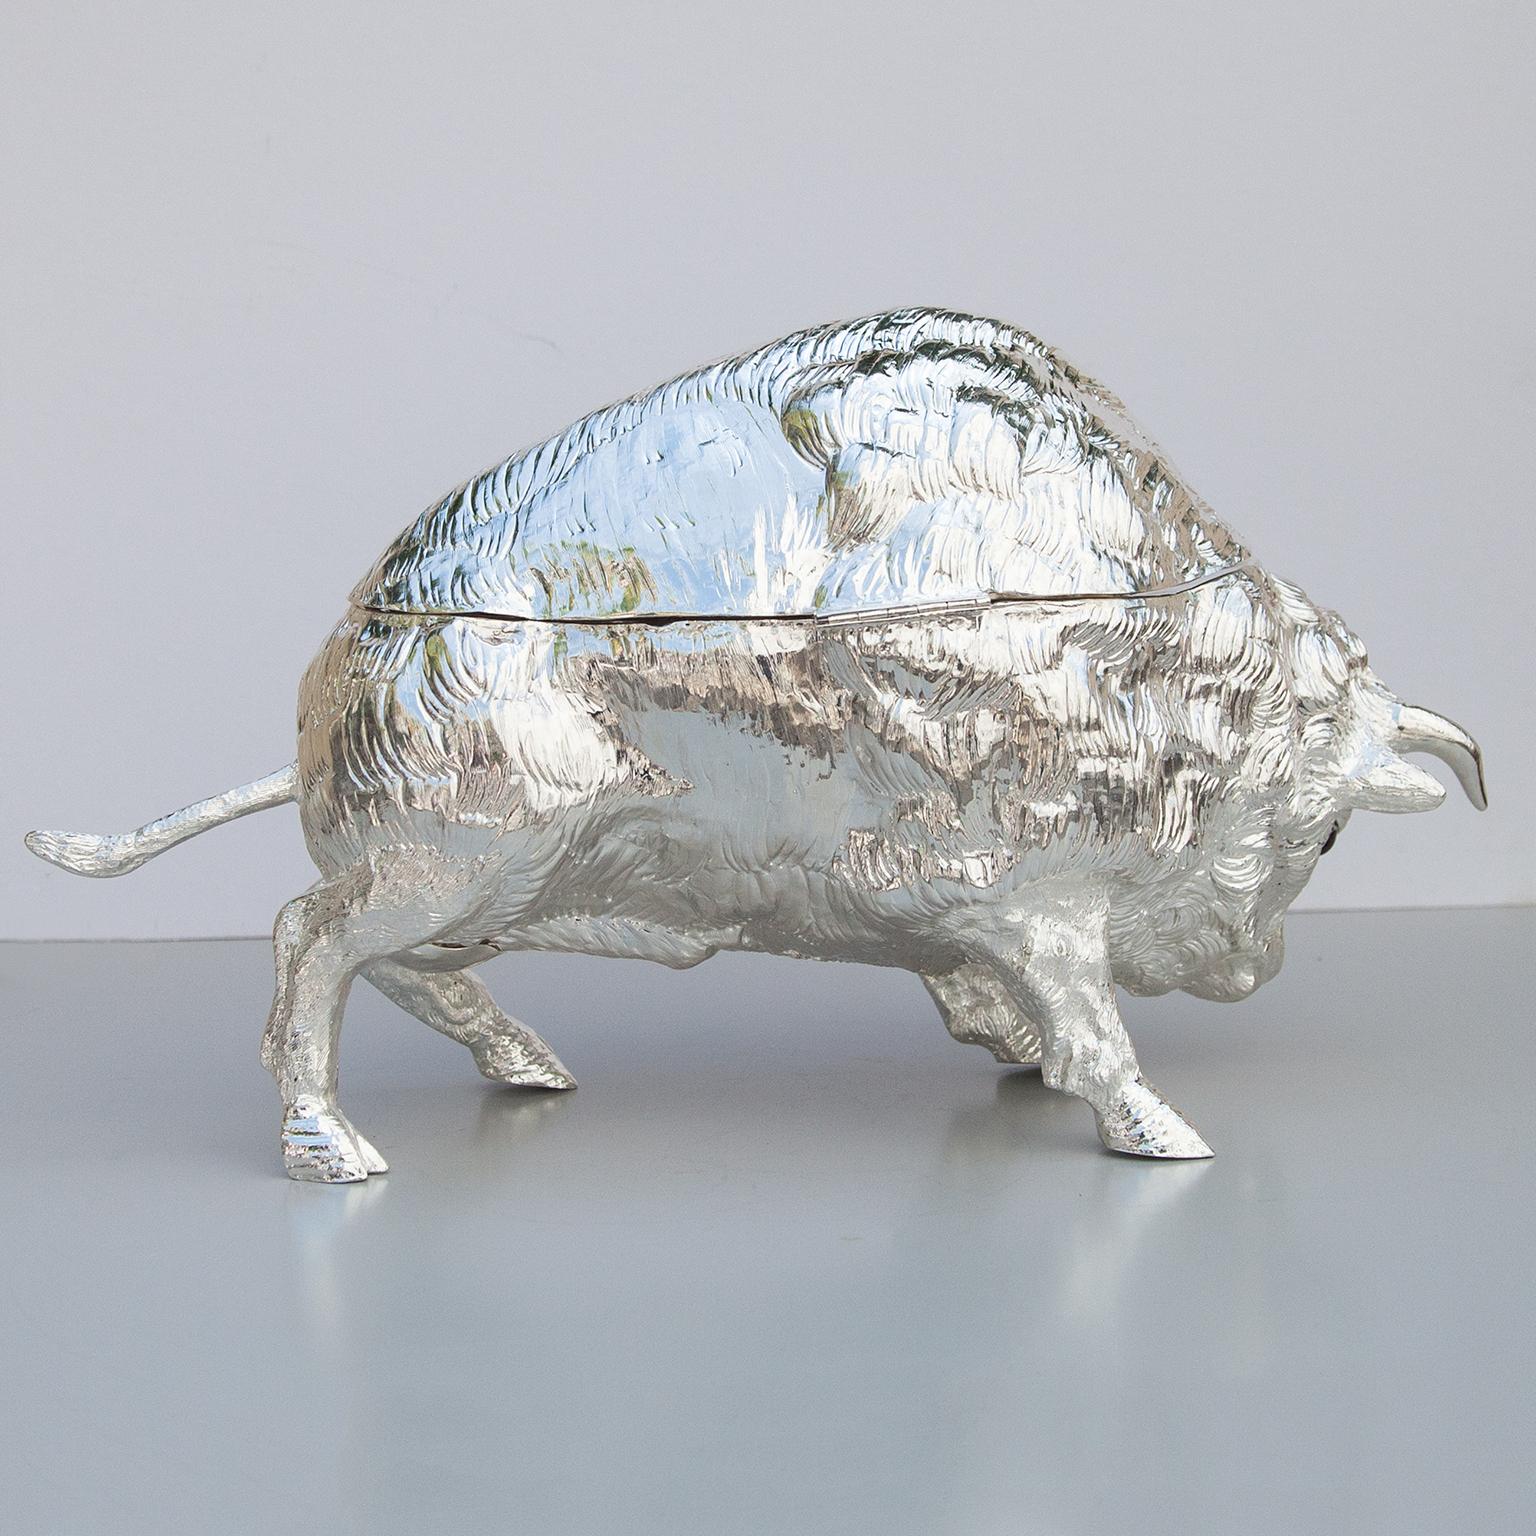 Mid-Century Modern Franco Lapini Wild Bull Bison Silver Plated Liquor Bar Set, Italy, 1970 For Sale